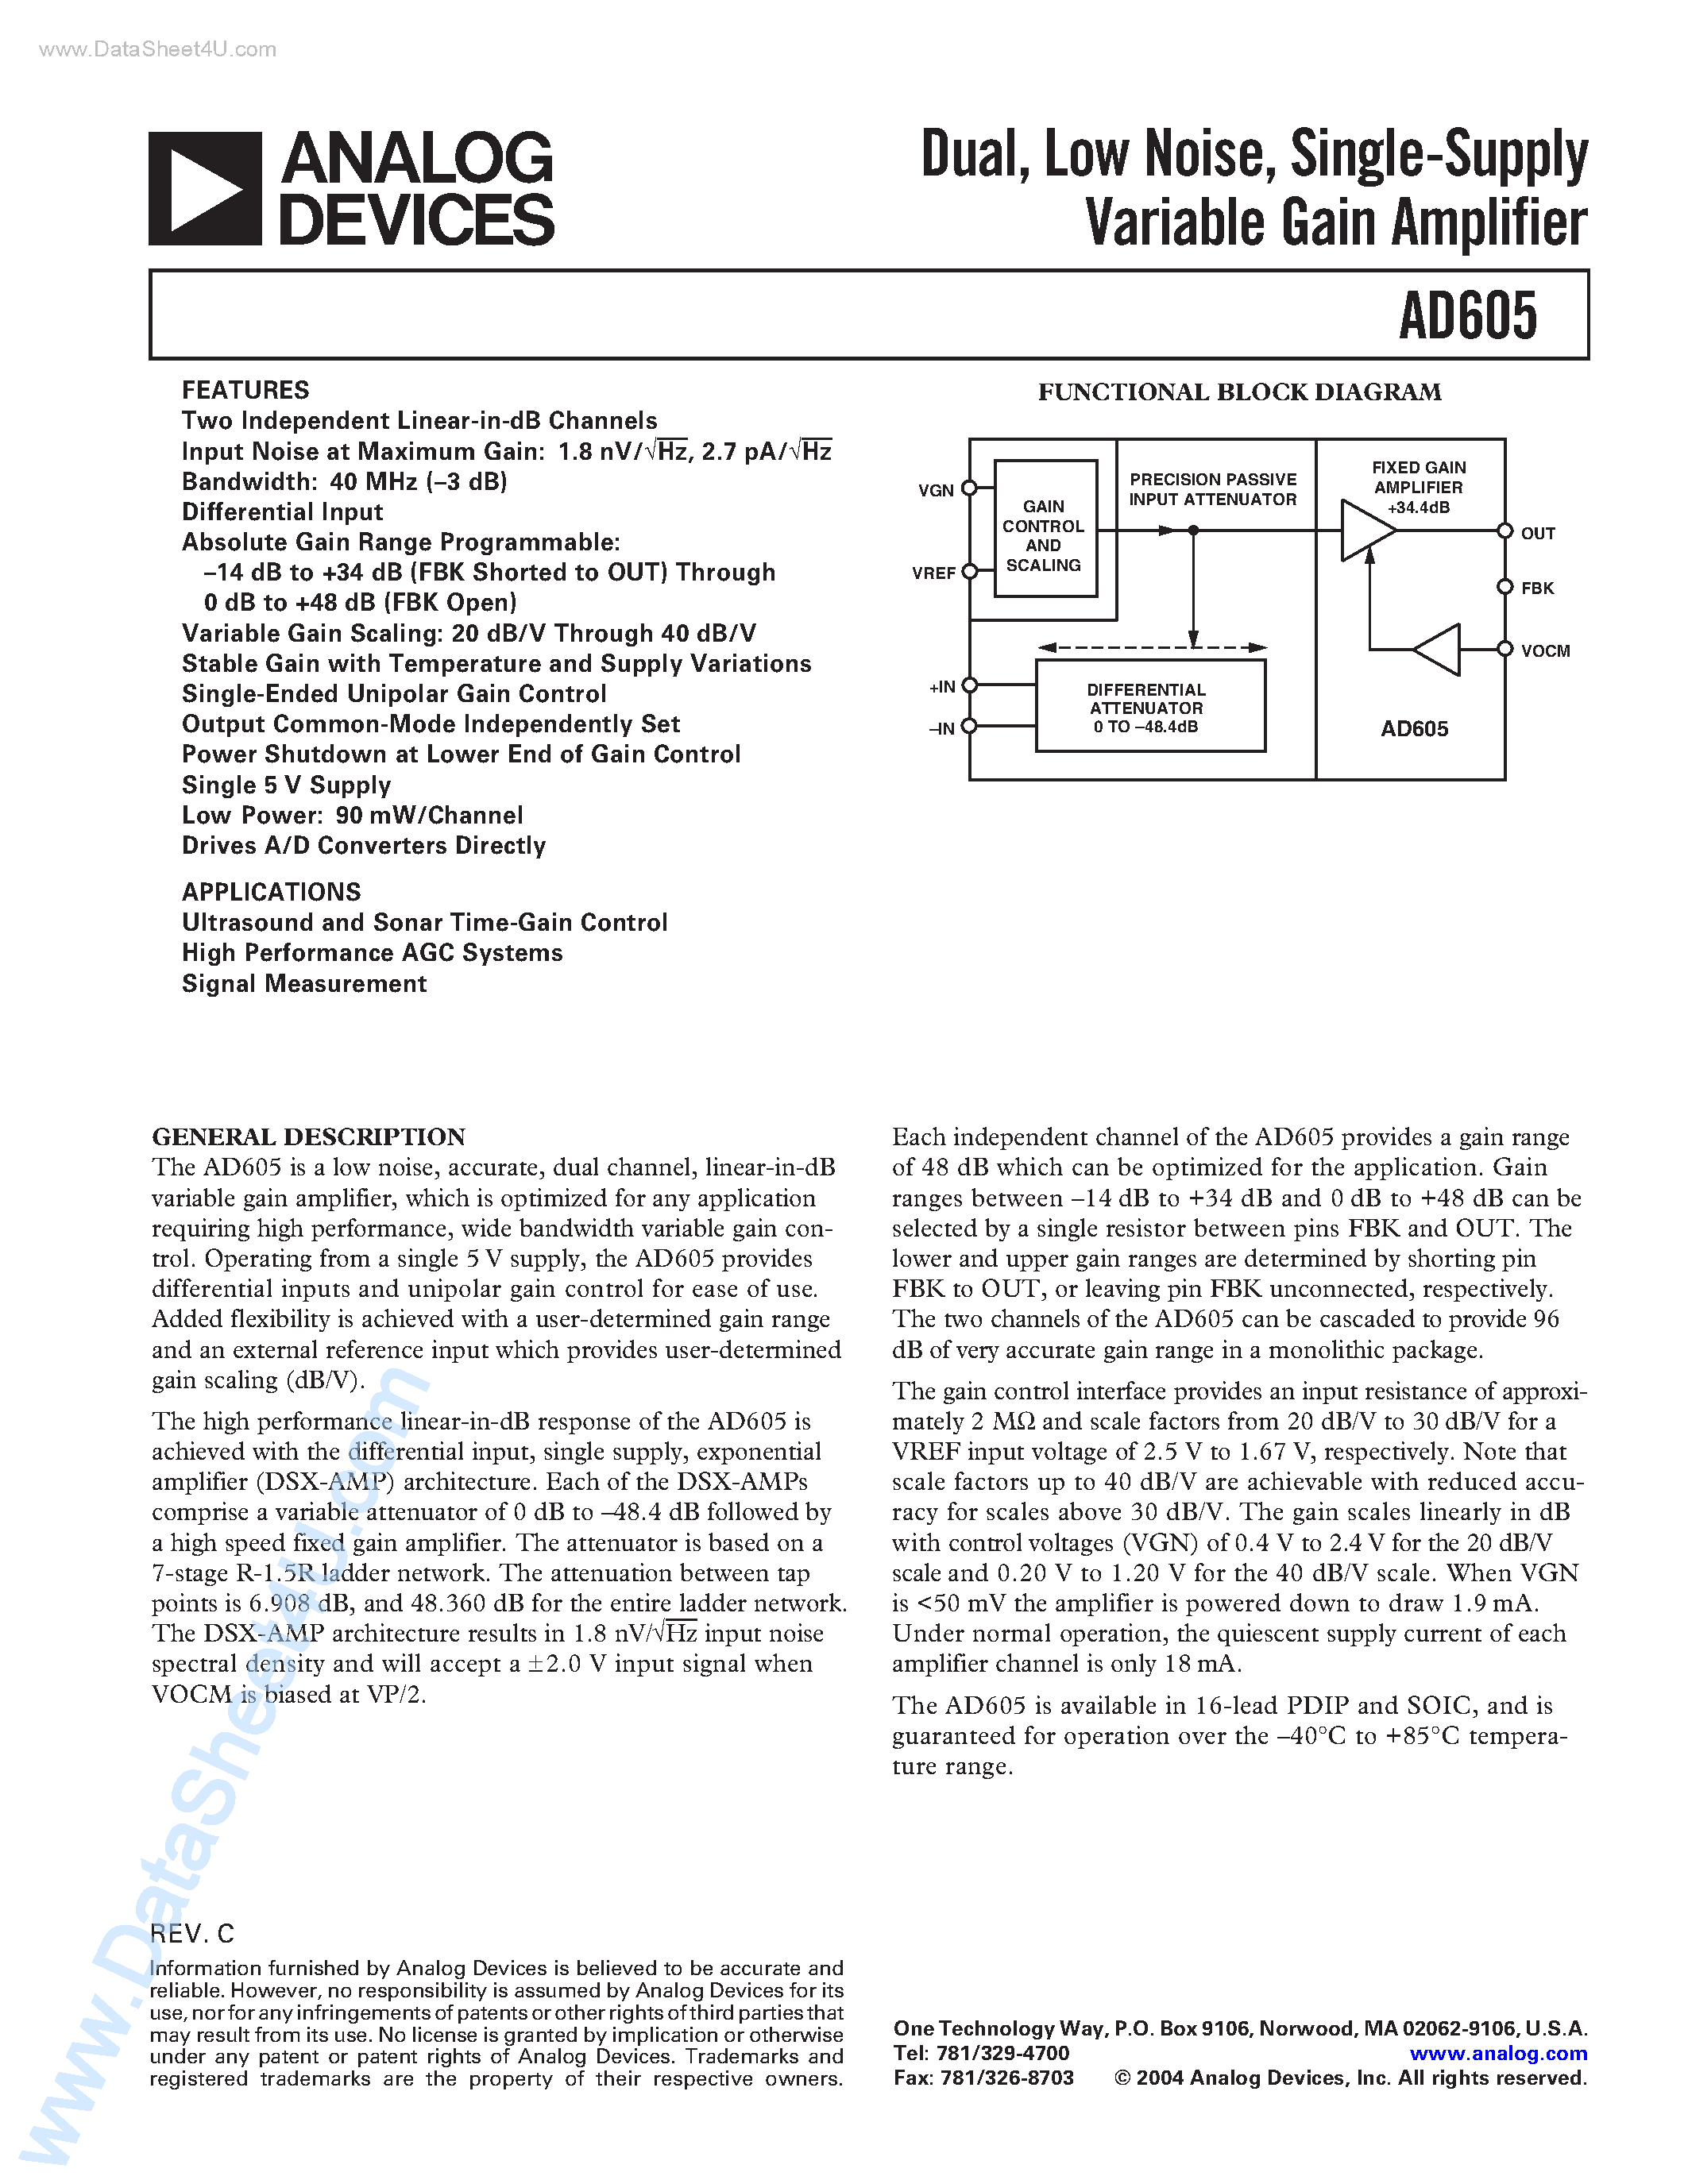 Datasheet AD605 - Dual/ Low Noise/ Single-Supply Variable Gain Amplifier page 1